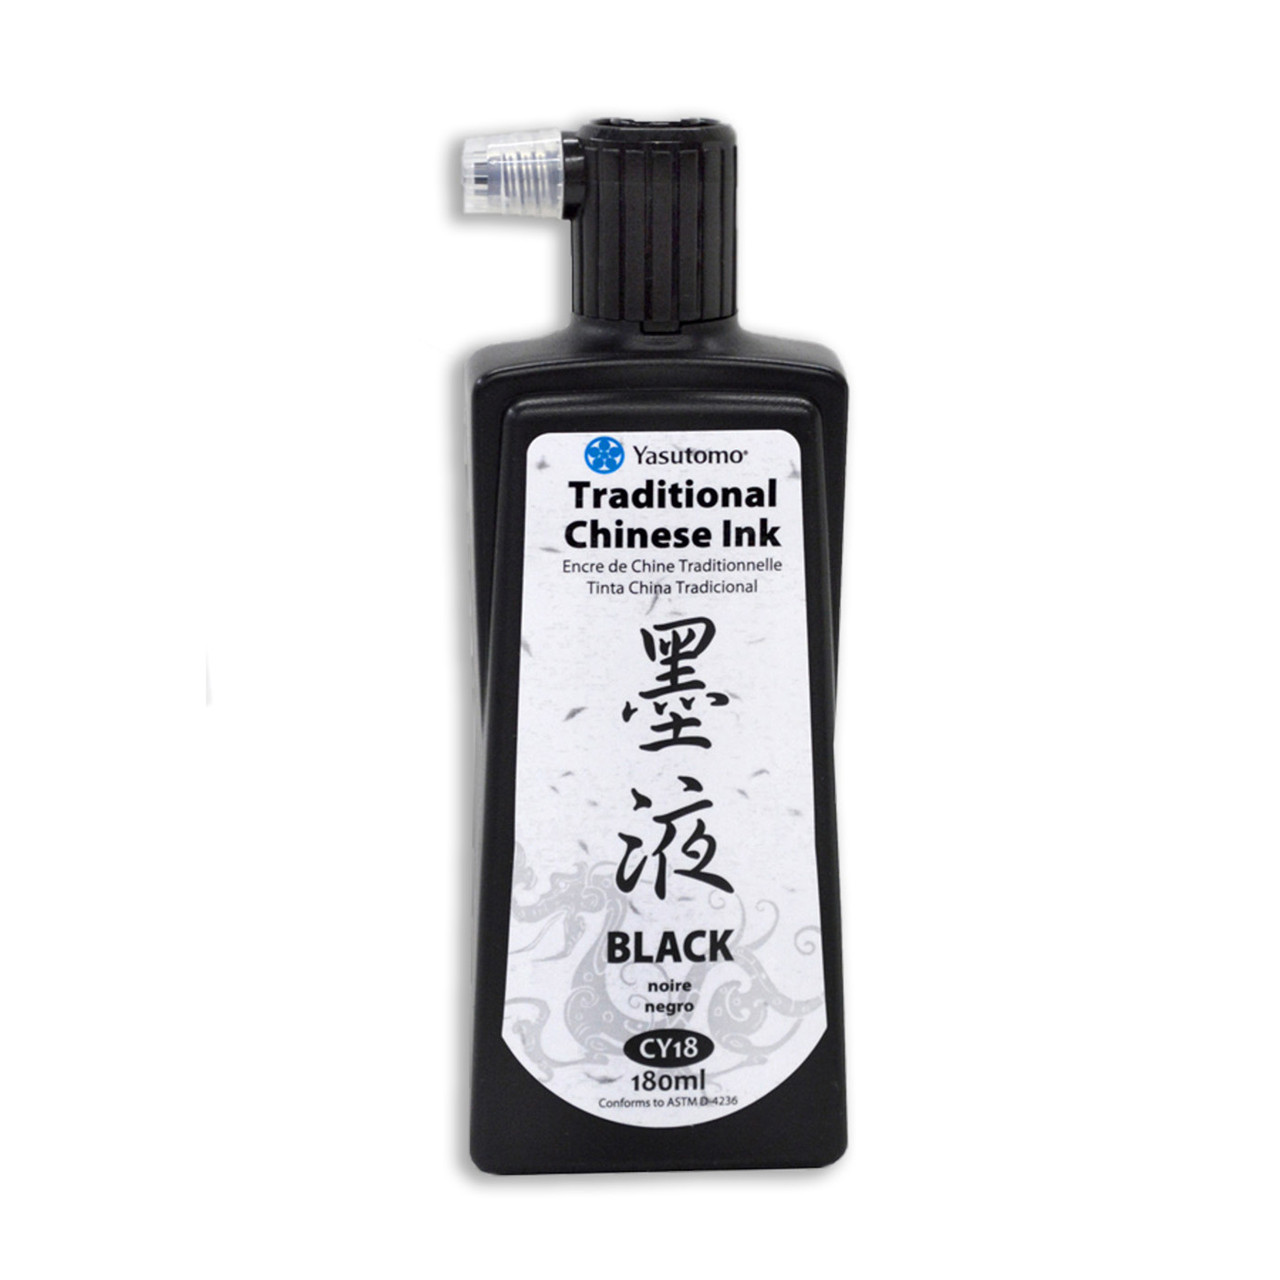 50 Sheets of Chinese Calligraphy Brush Ink Writing Sumi Paper